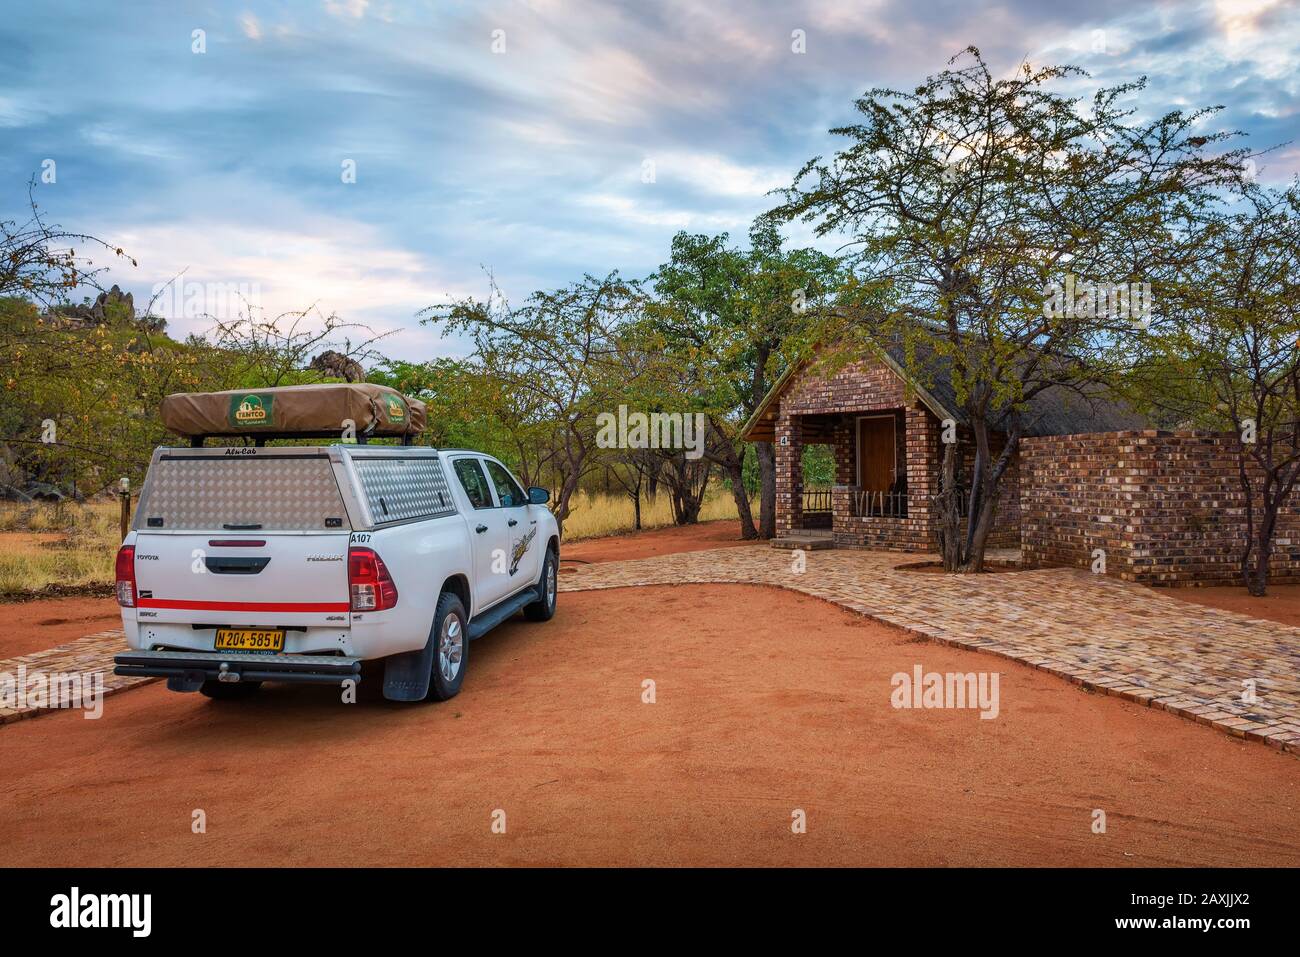 inhoudsopgave Dijk In zicht 4x4 suv car with a roof tent parks at the Kaoko Bush Lodge near Etosha,  Namibia Stock Photo - Alamy